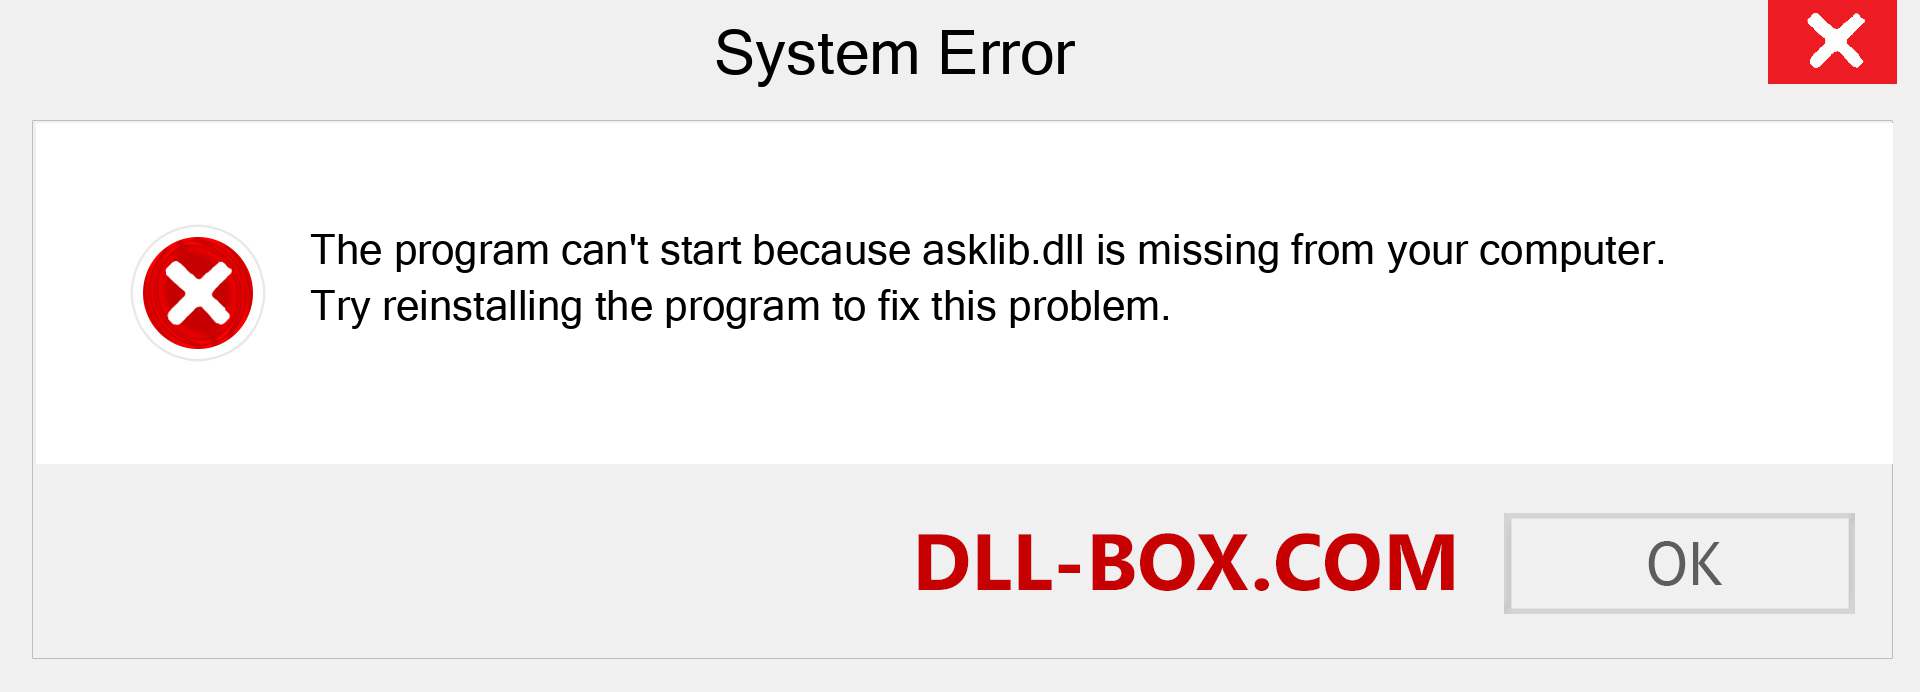  asklib.dll file is missing?. Download for Windows 7, 8, 10 - Fix  asklib dll Missing Error on Windows, photos, images